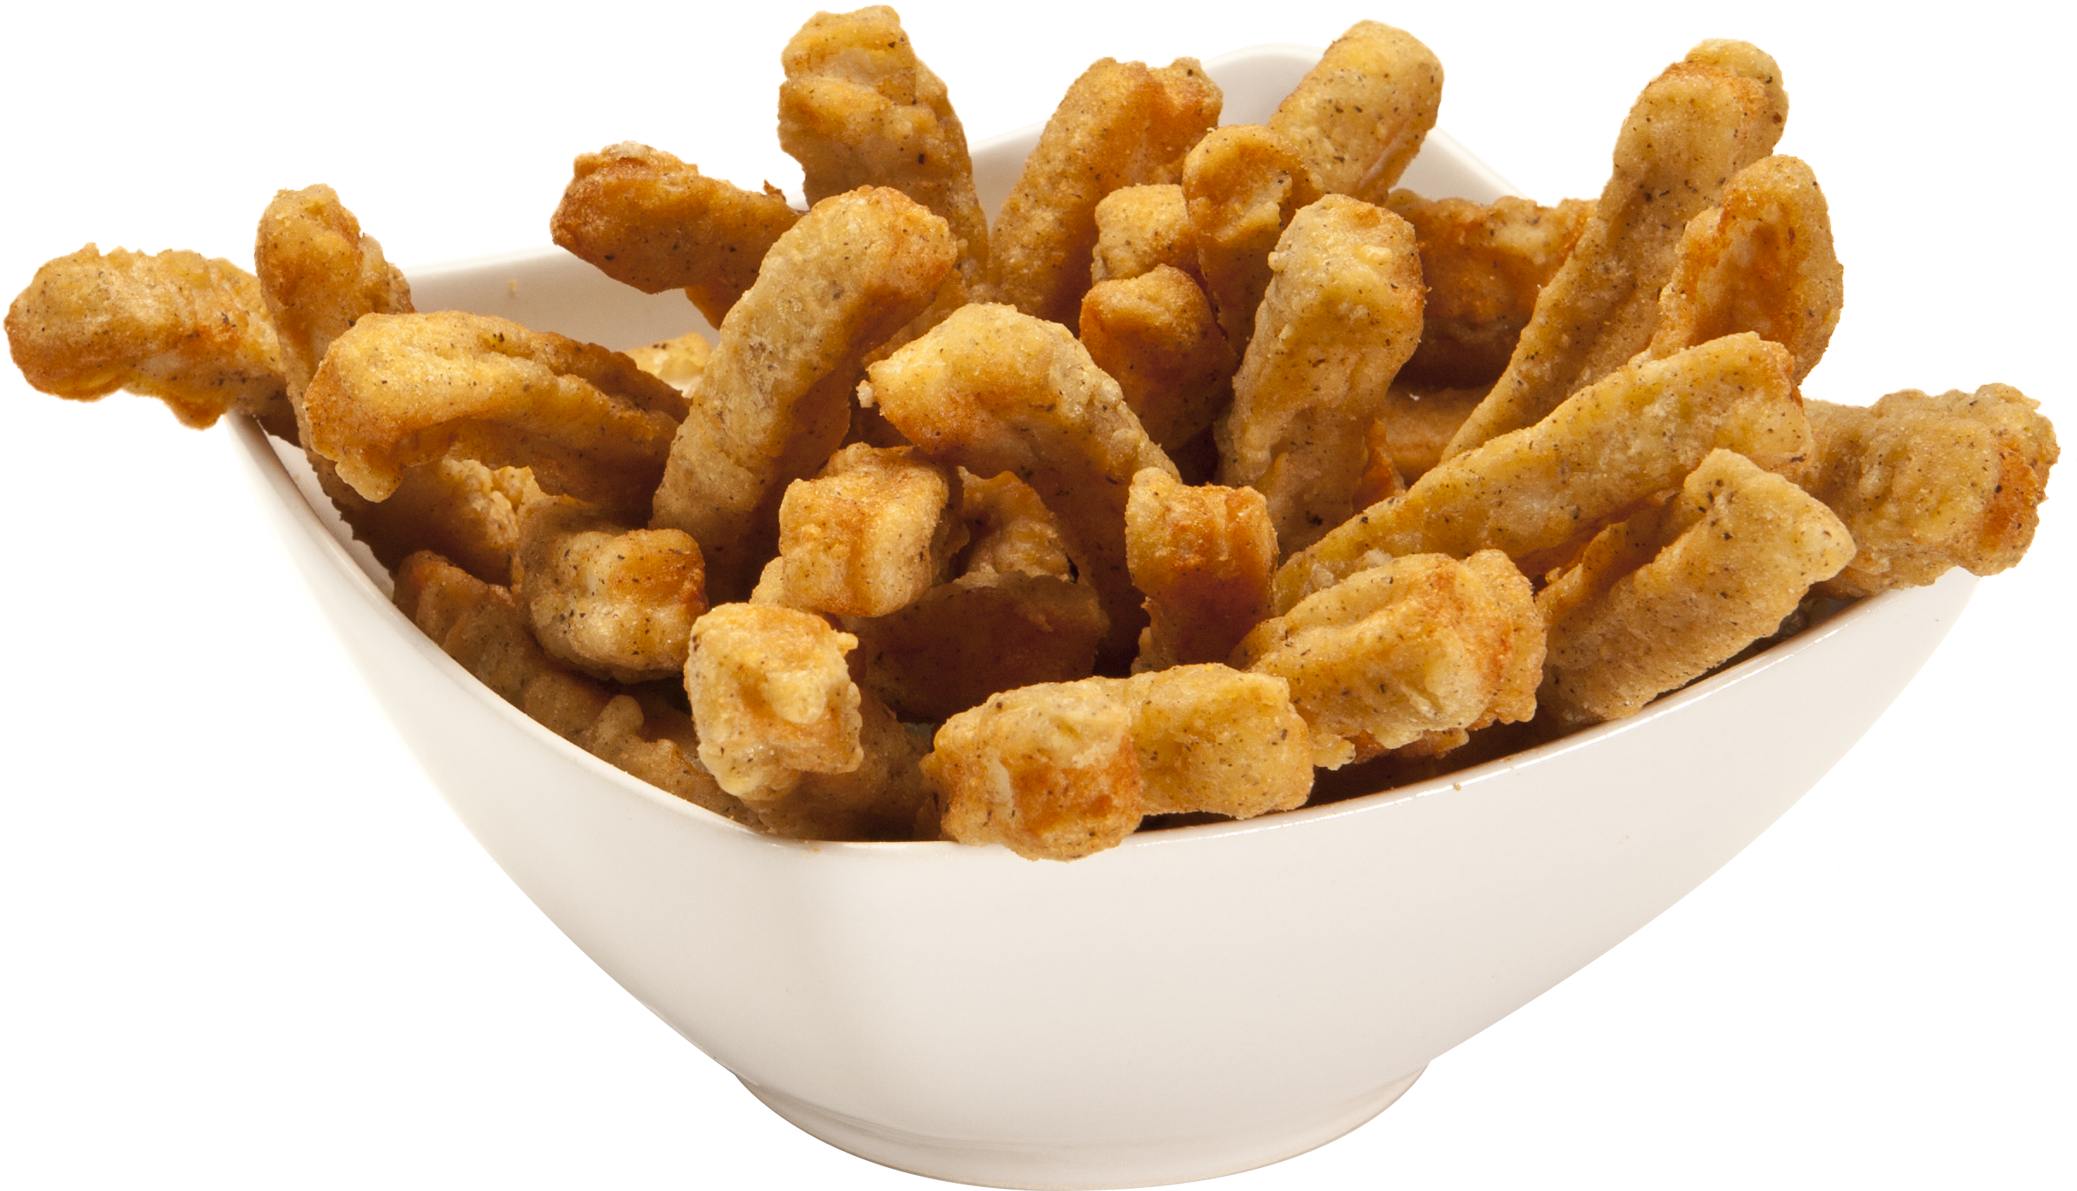 A Bowl Of Fried Food